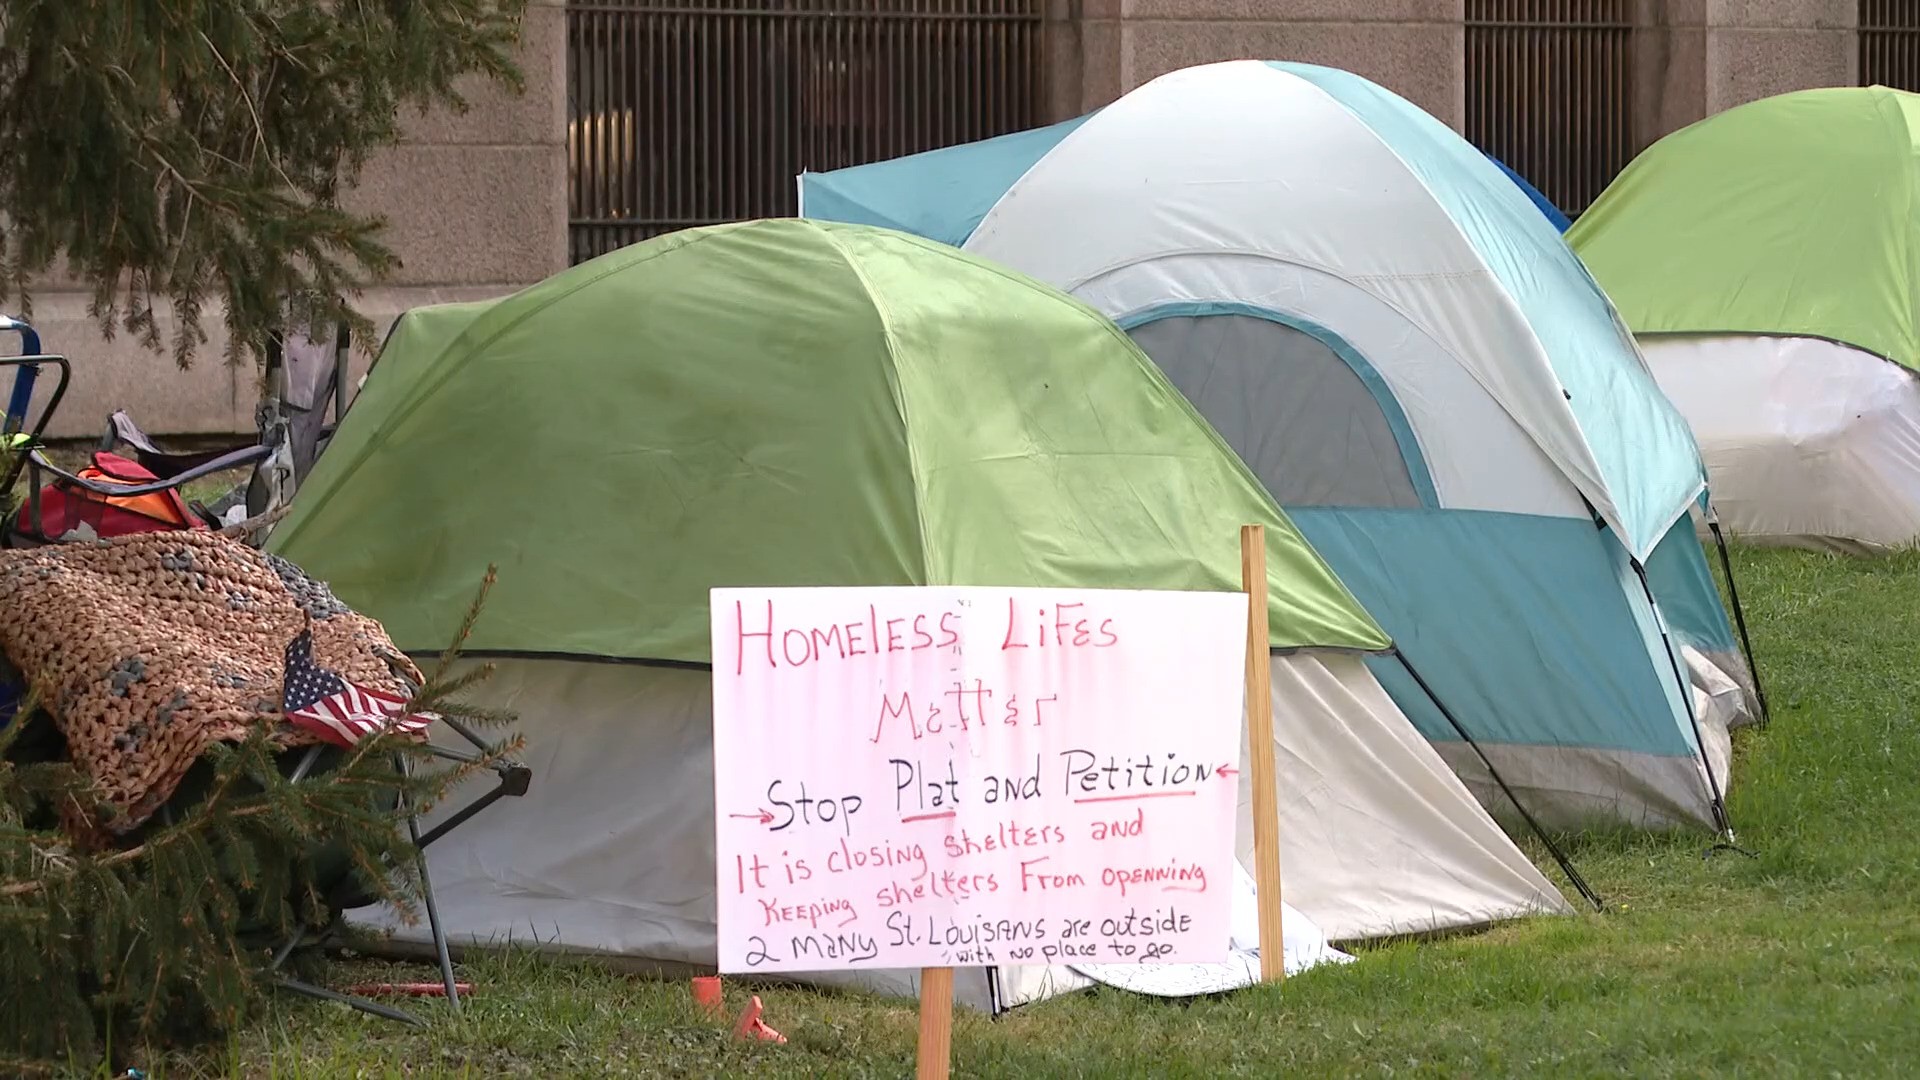 The homeless encampment outside City Hall in downtown St. Louis continues to attract a lot of attention.